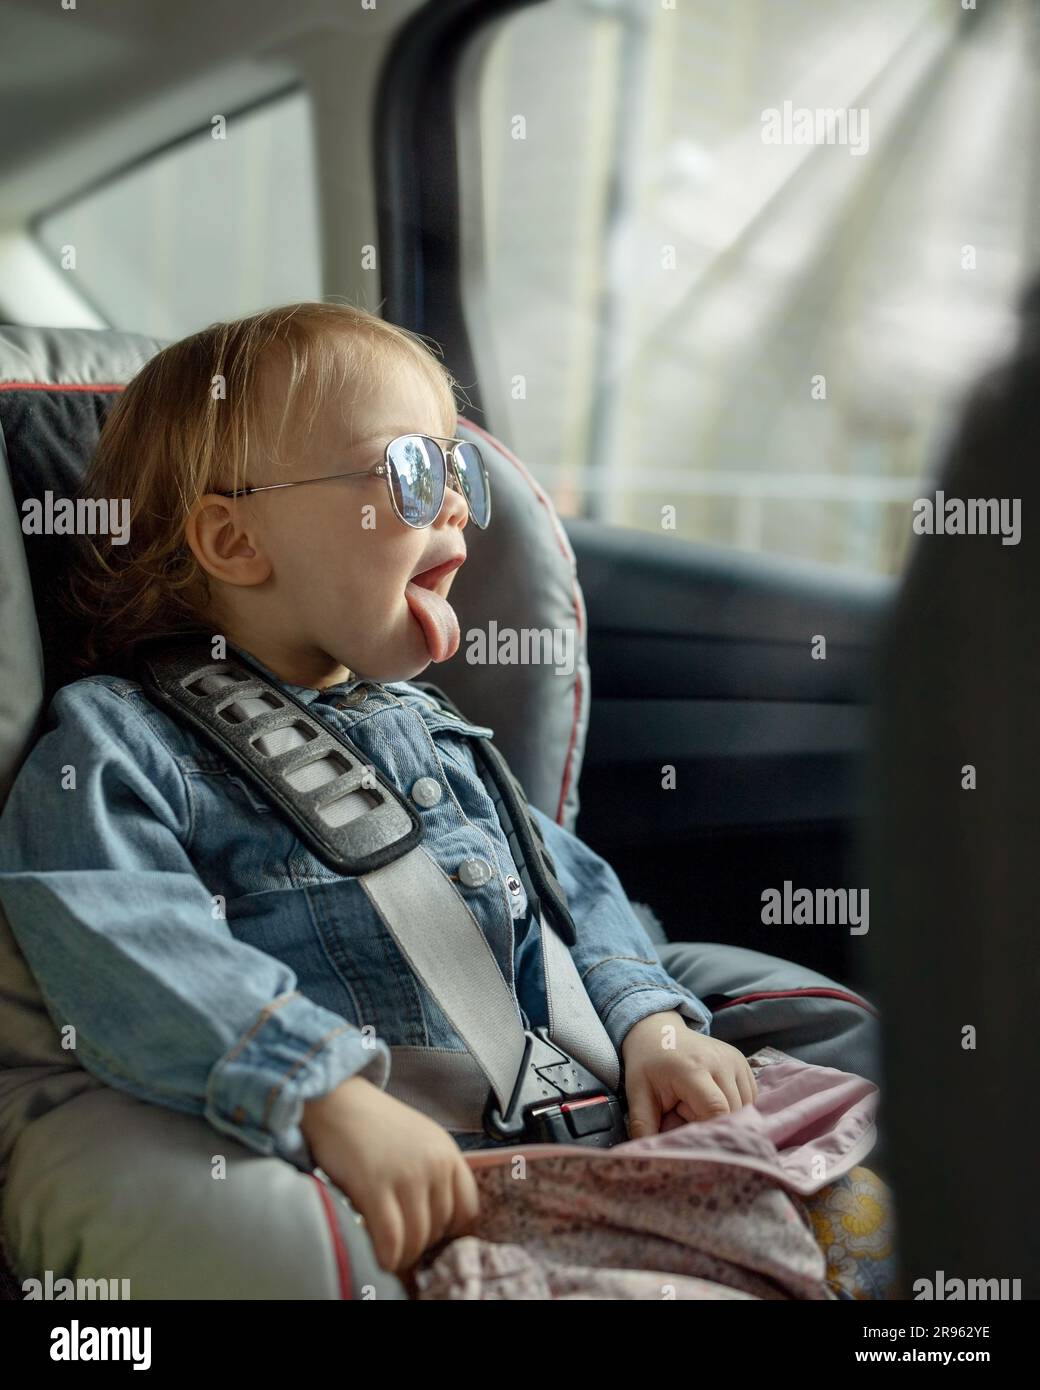 A baby in his mother's sunglasses sits in a car in a child seat and shows his tongue out the window Stock Photo